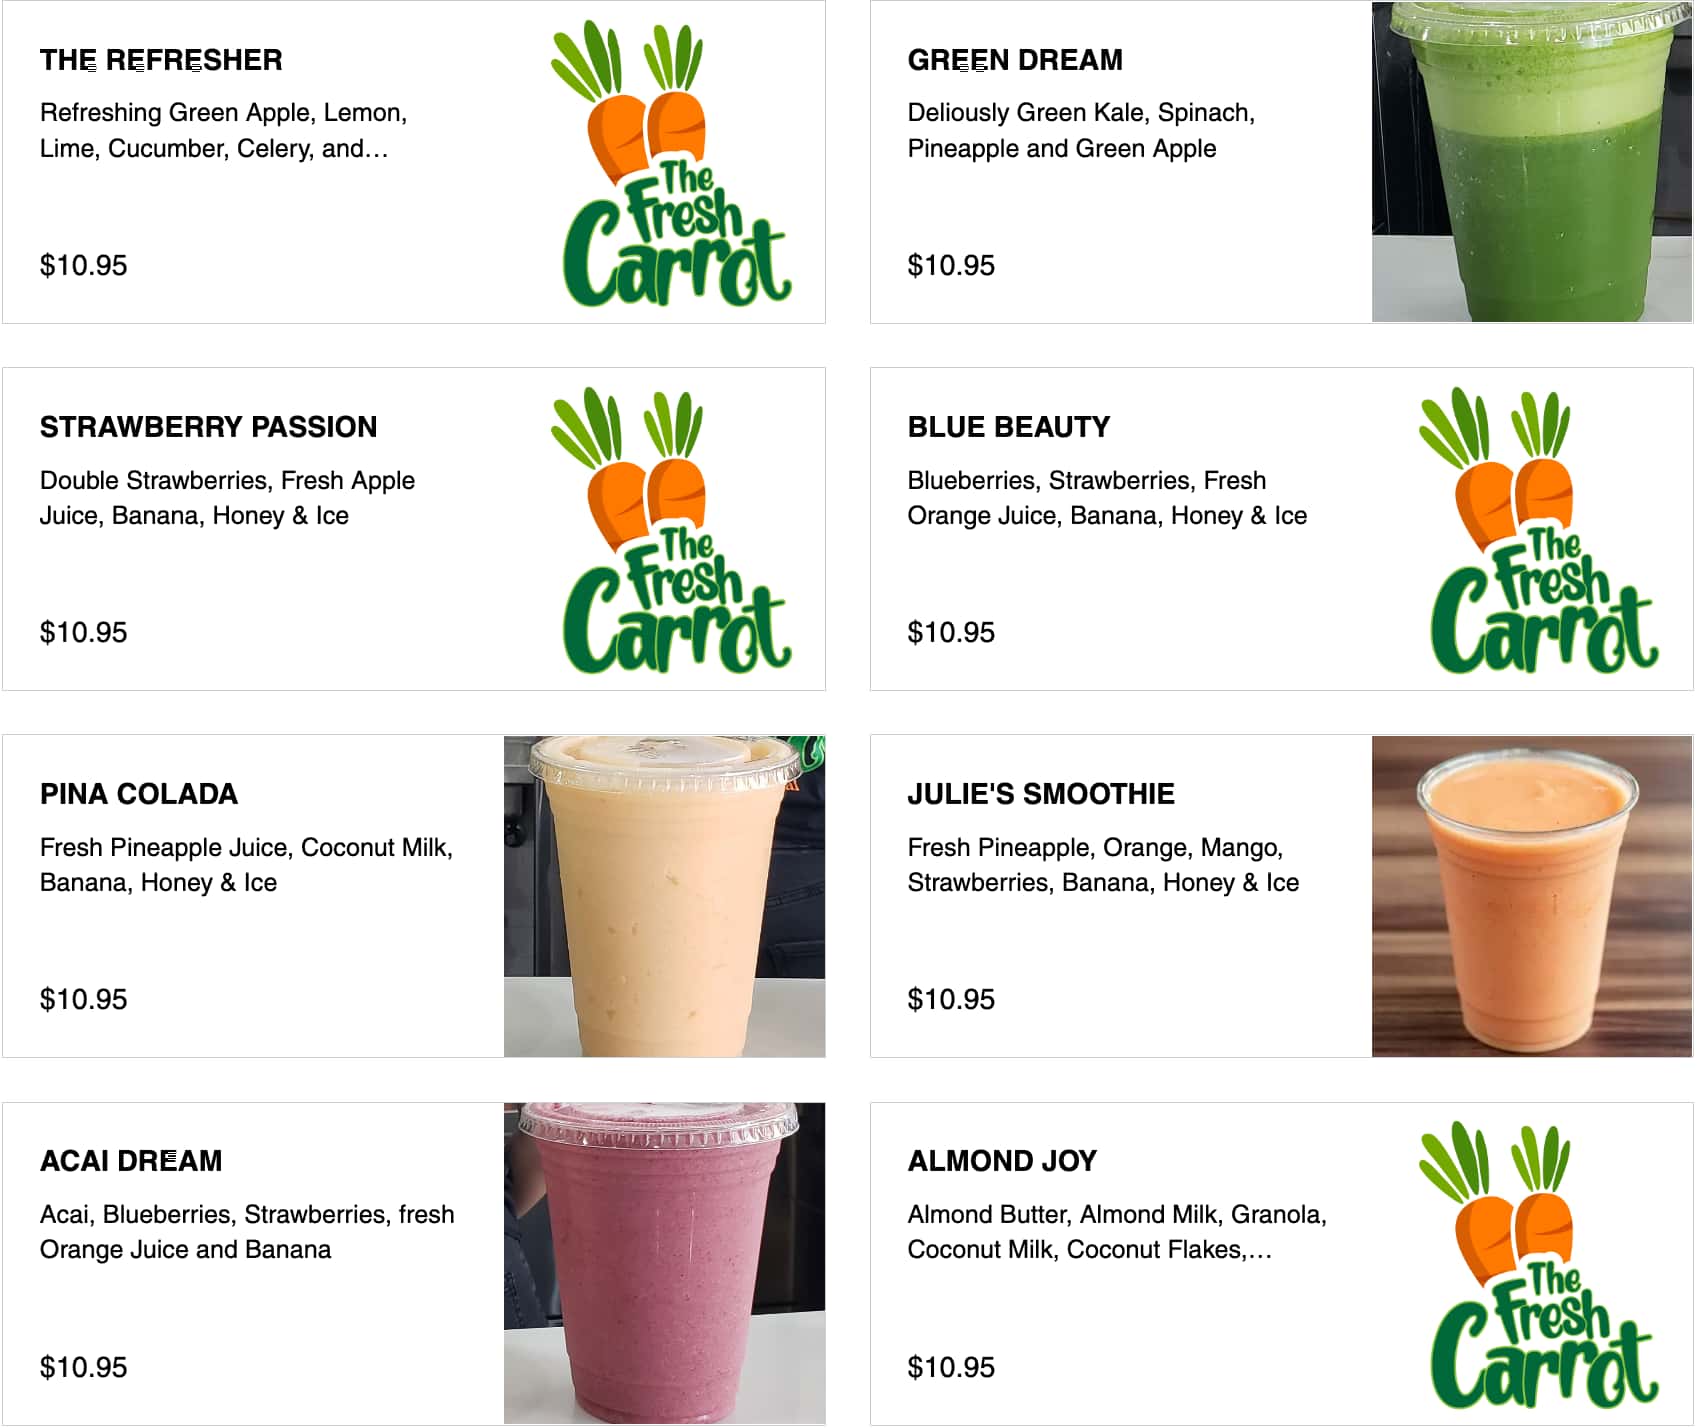 The Fresh Carrot Fresh Juices and Smoothies Menu